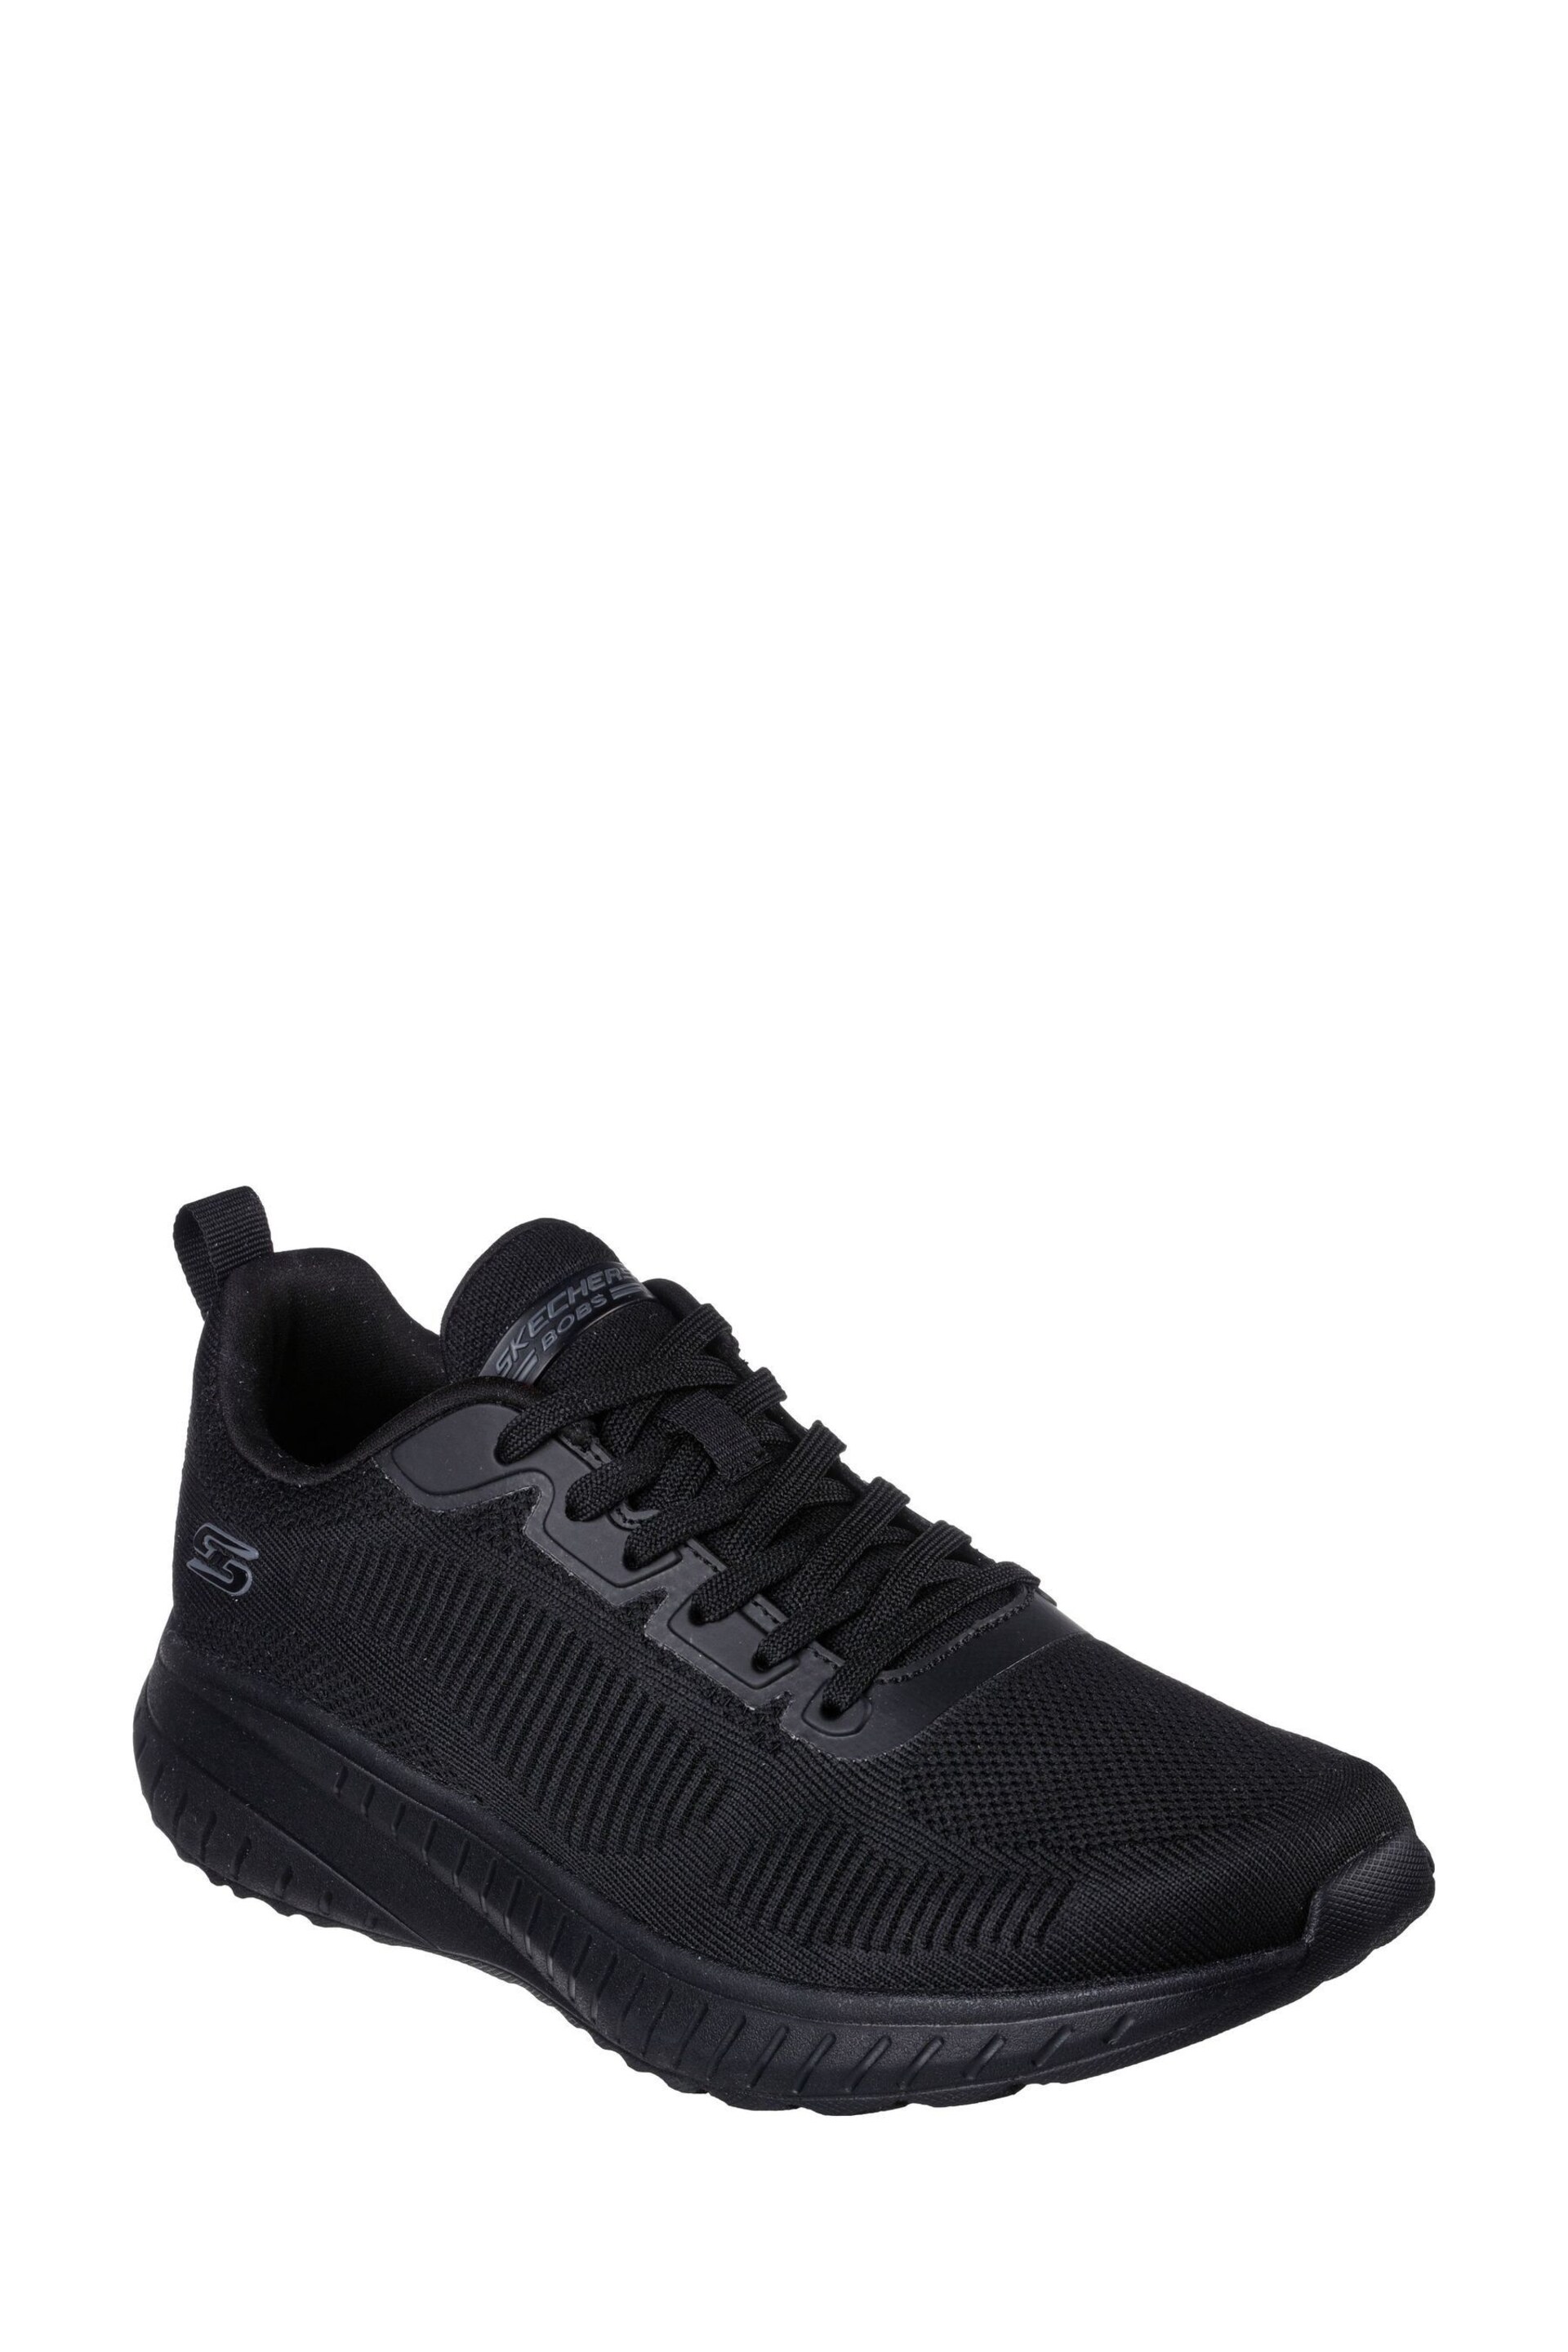 Skechers Black Mens Bobs Squad Chaos Prism Bold Trainers - Image 3 of 5